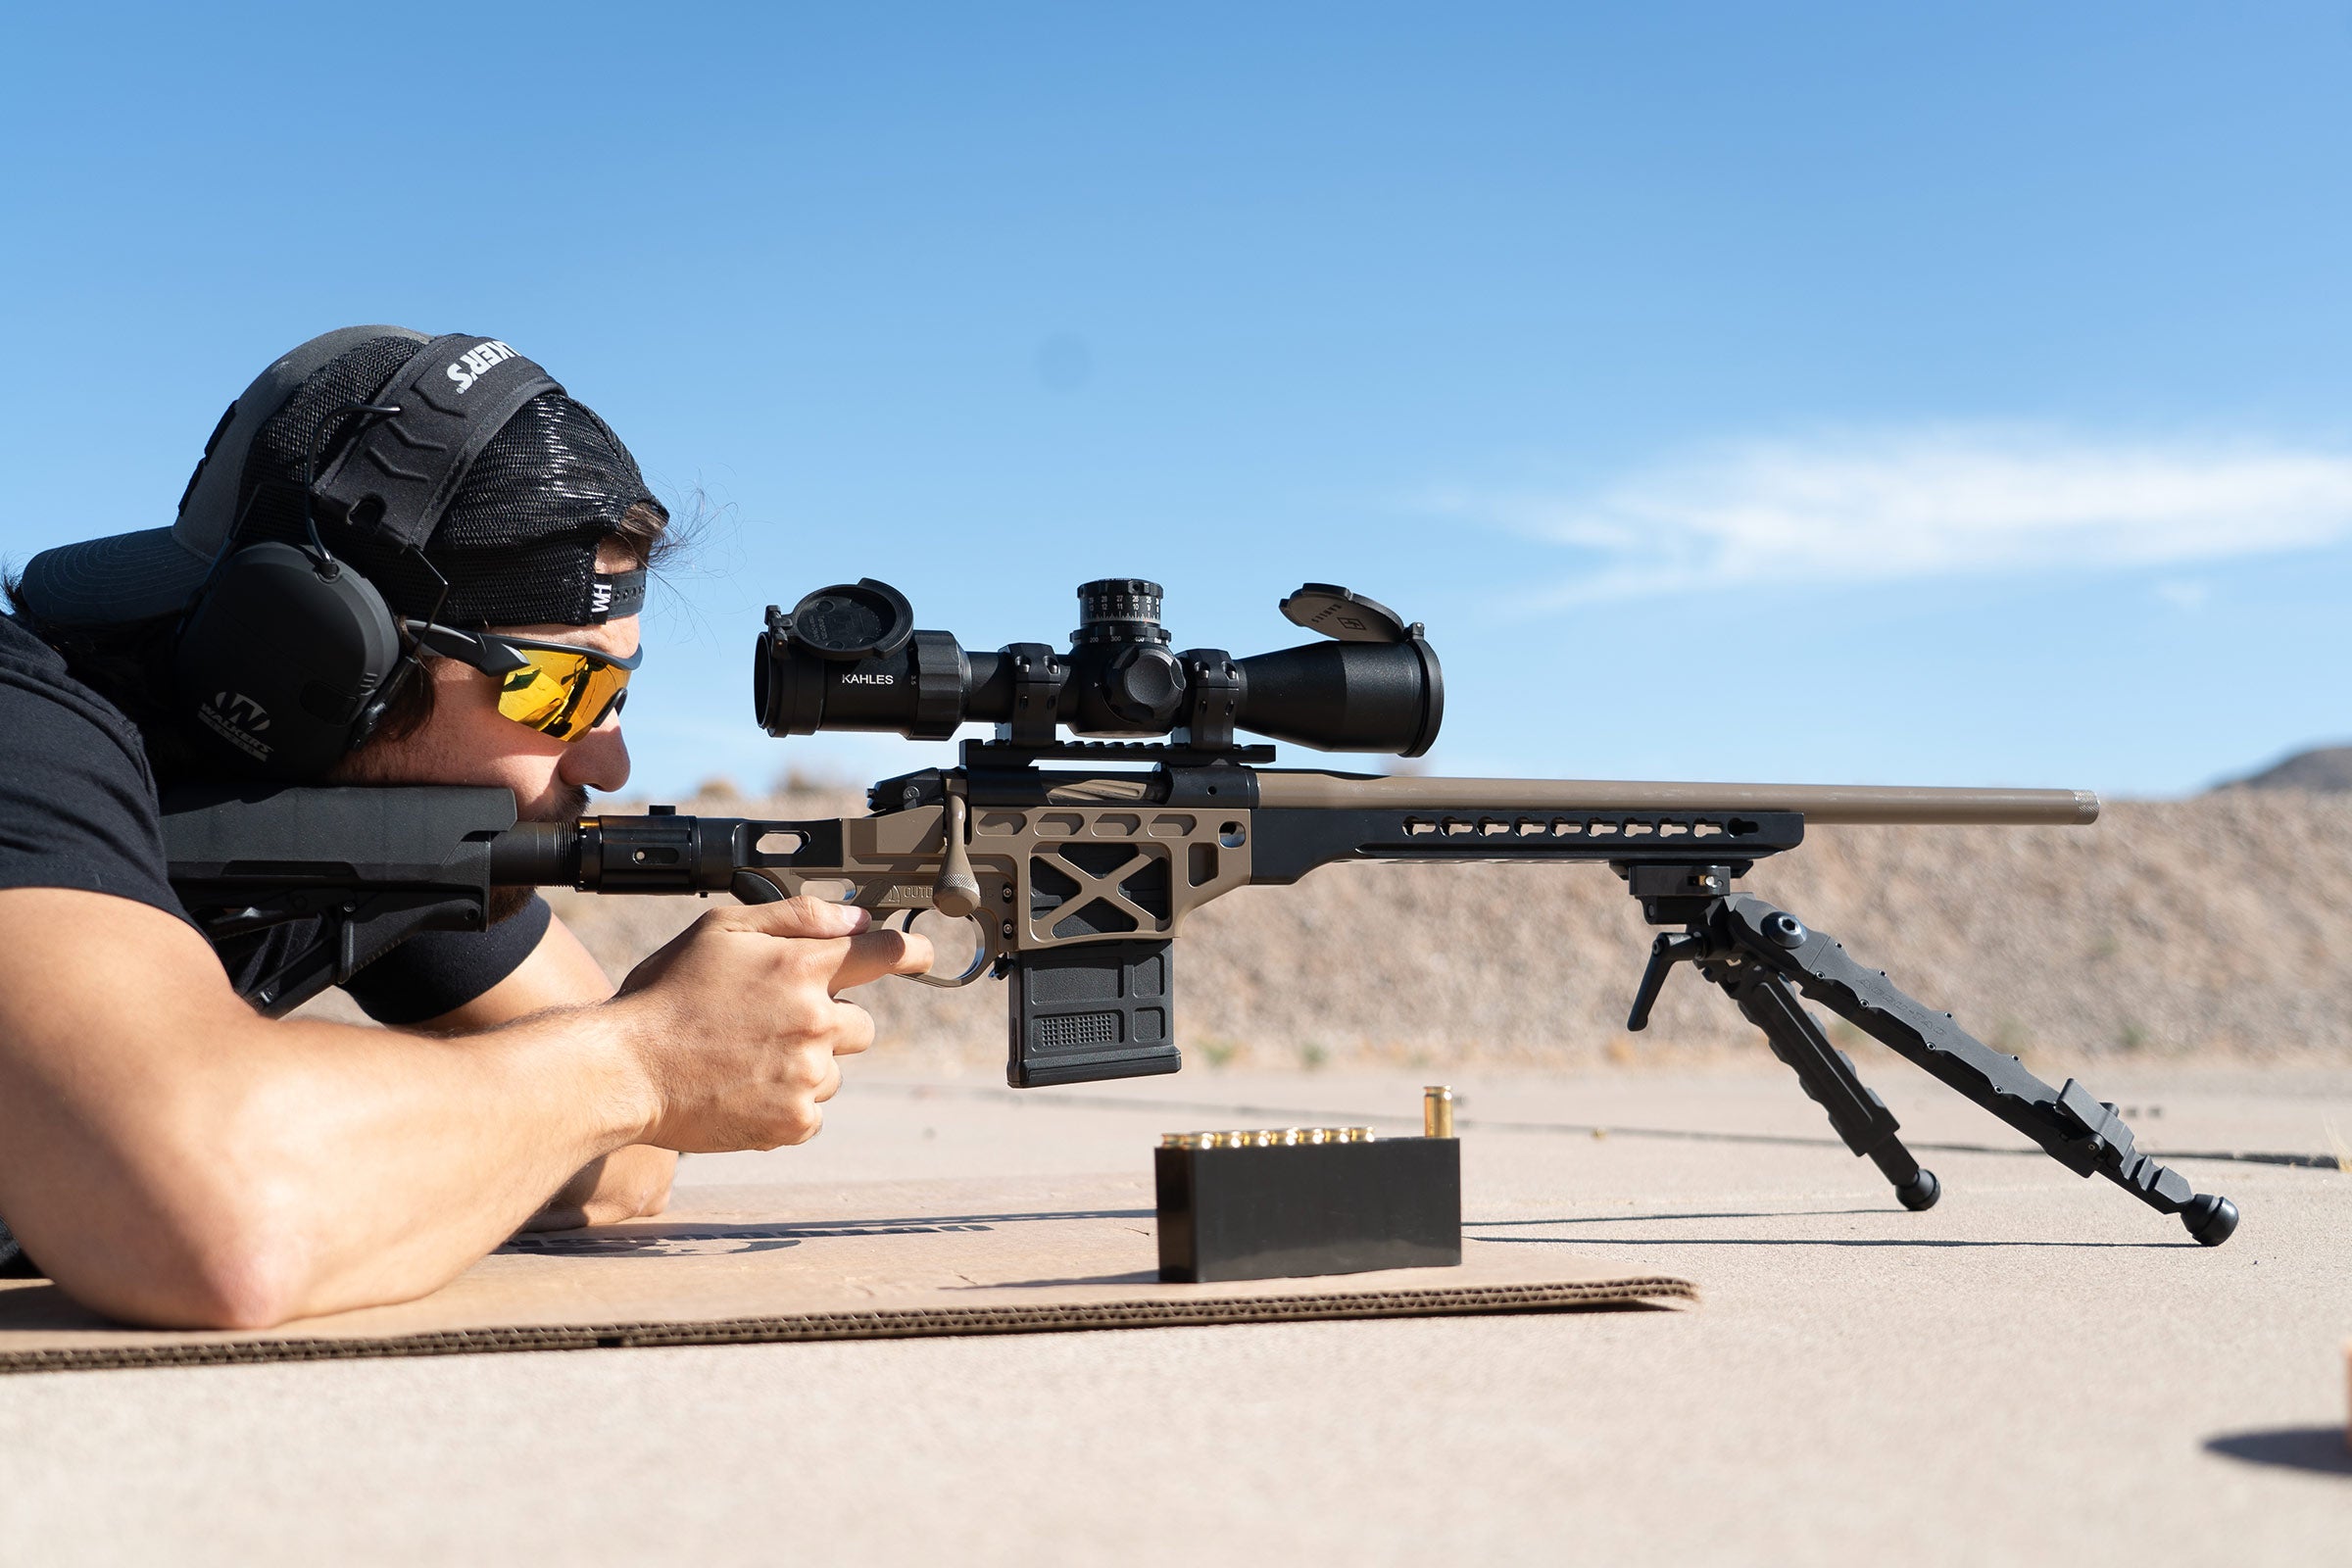 Rifle Scopes: First Focal Plane vs. Second Focal Plane